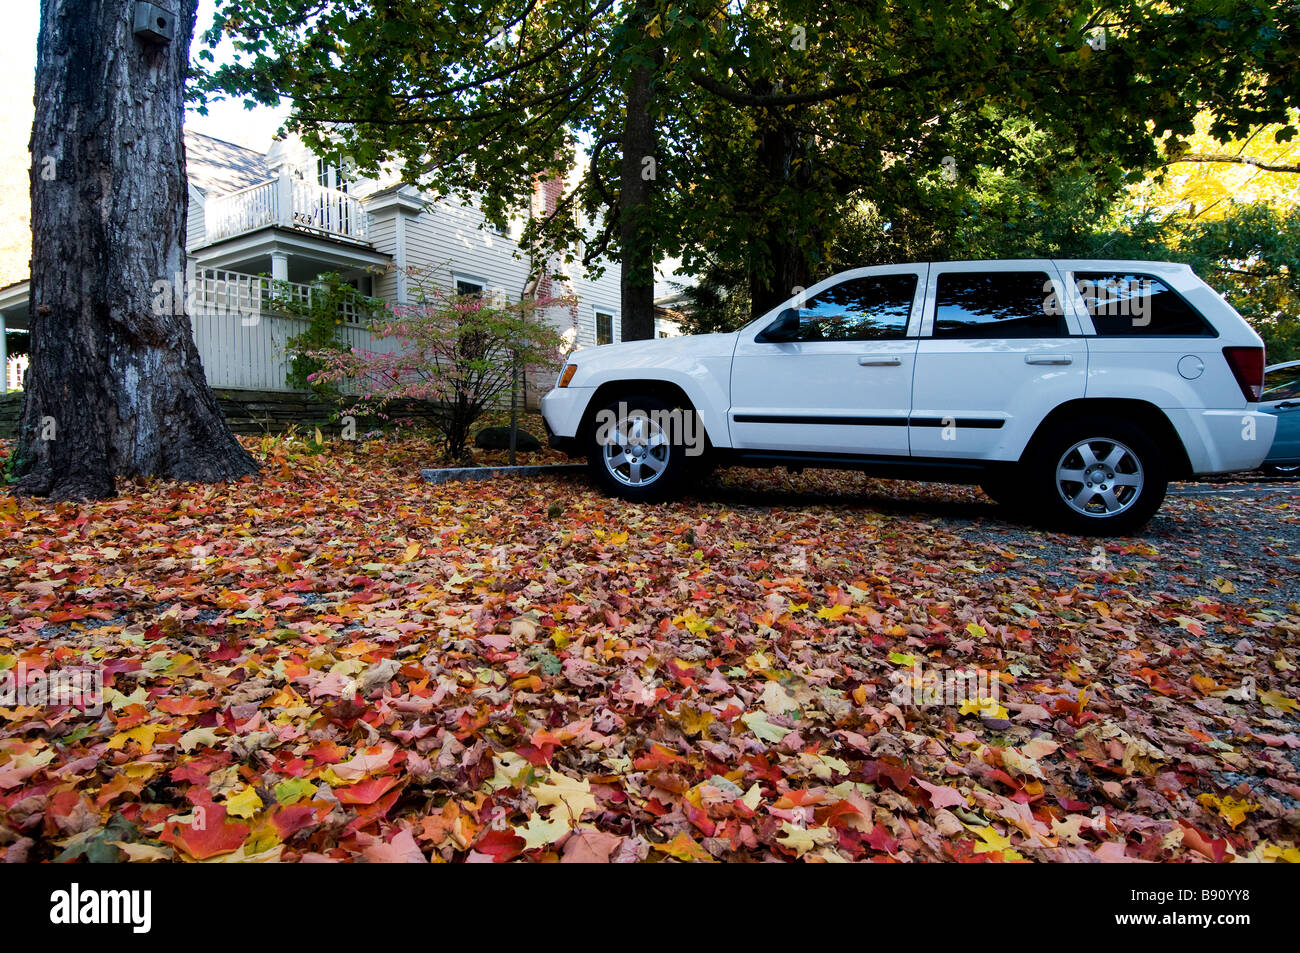 Fallen leaves blanket the car park. Autimn in  Camden, Maine, New England Stock Photo